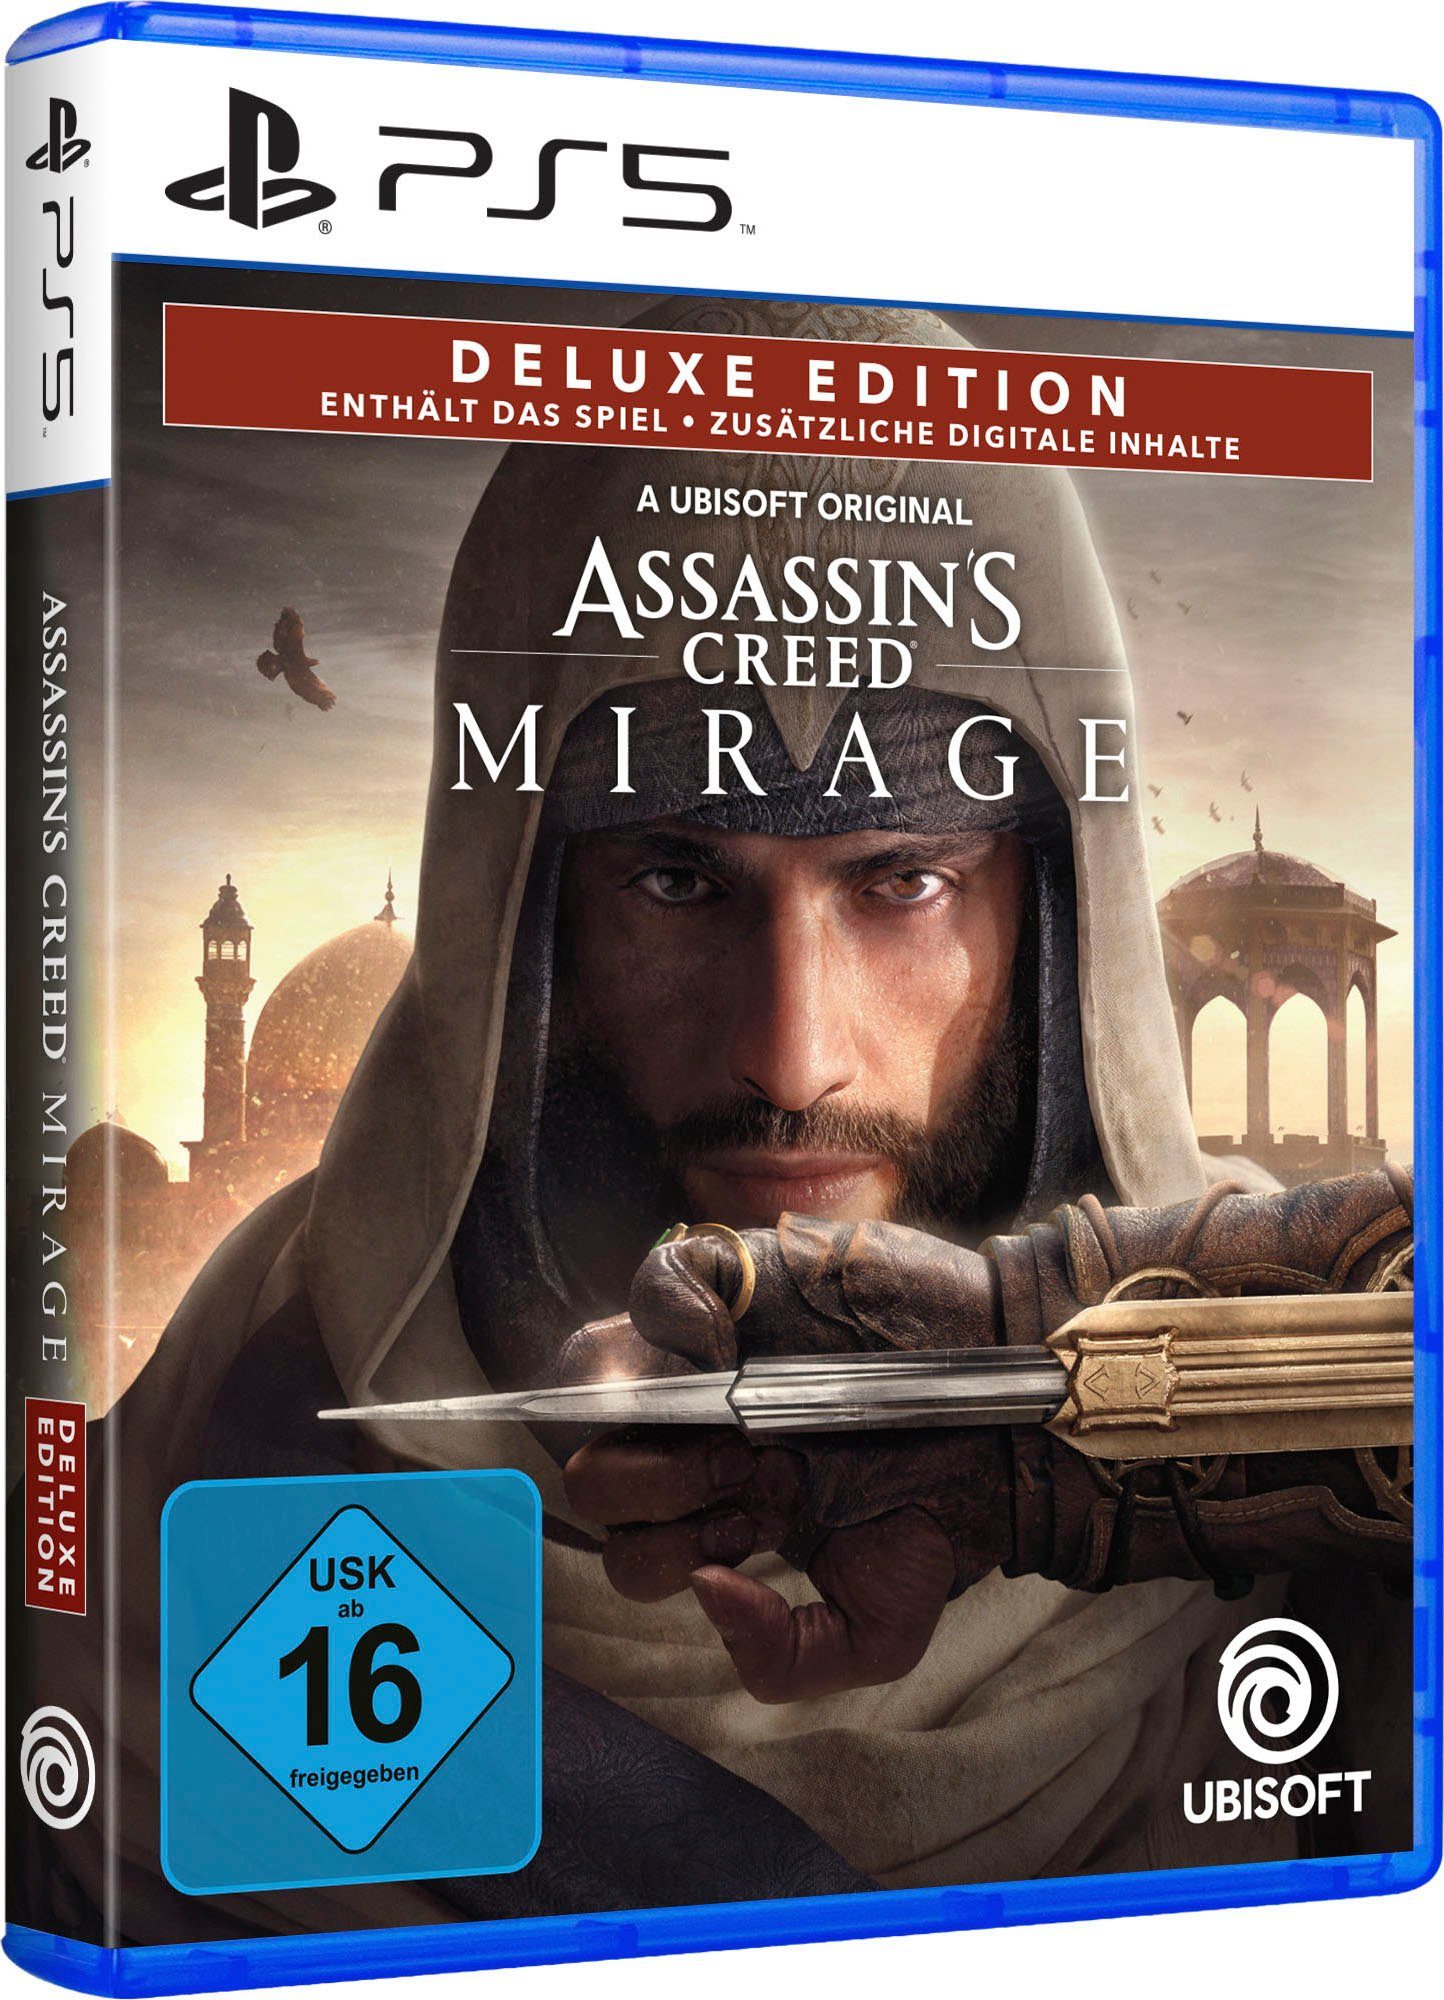 Creed 5 Edition PlayStation Deluxe Mirage Assassin's - UBISOFT